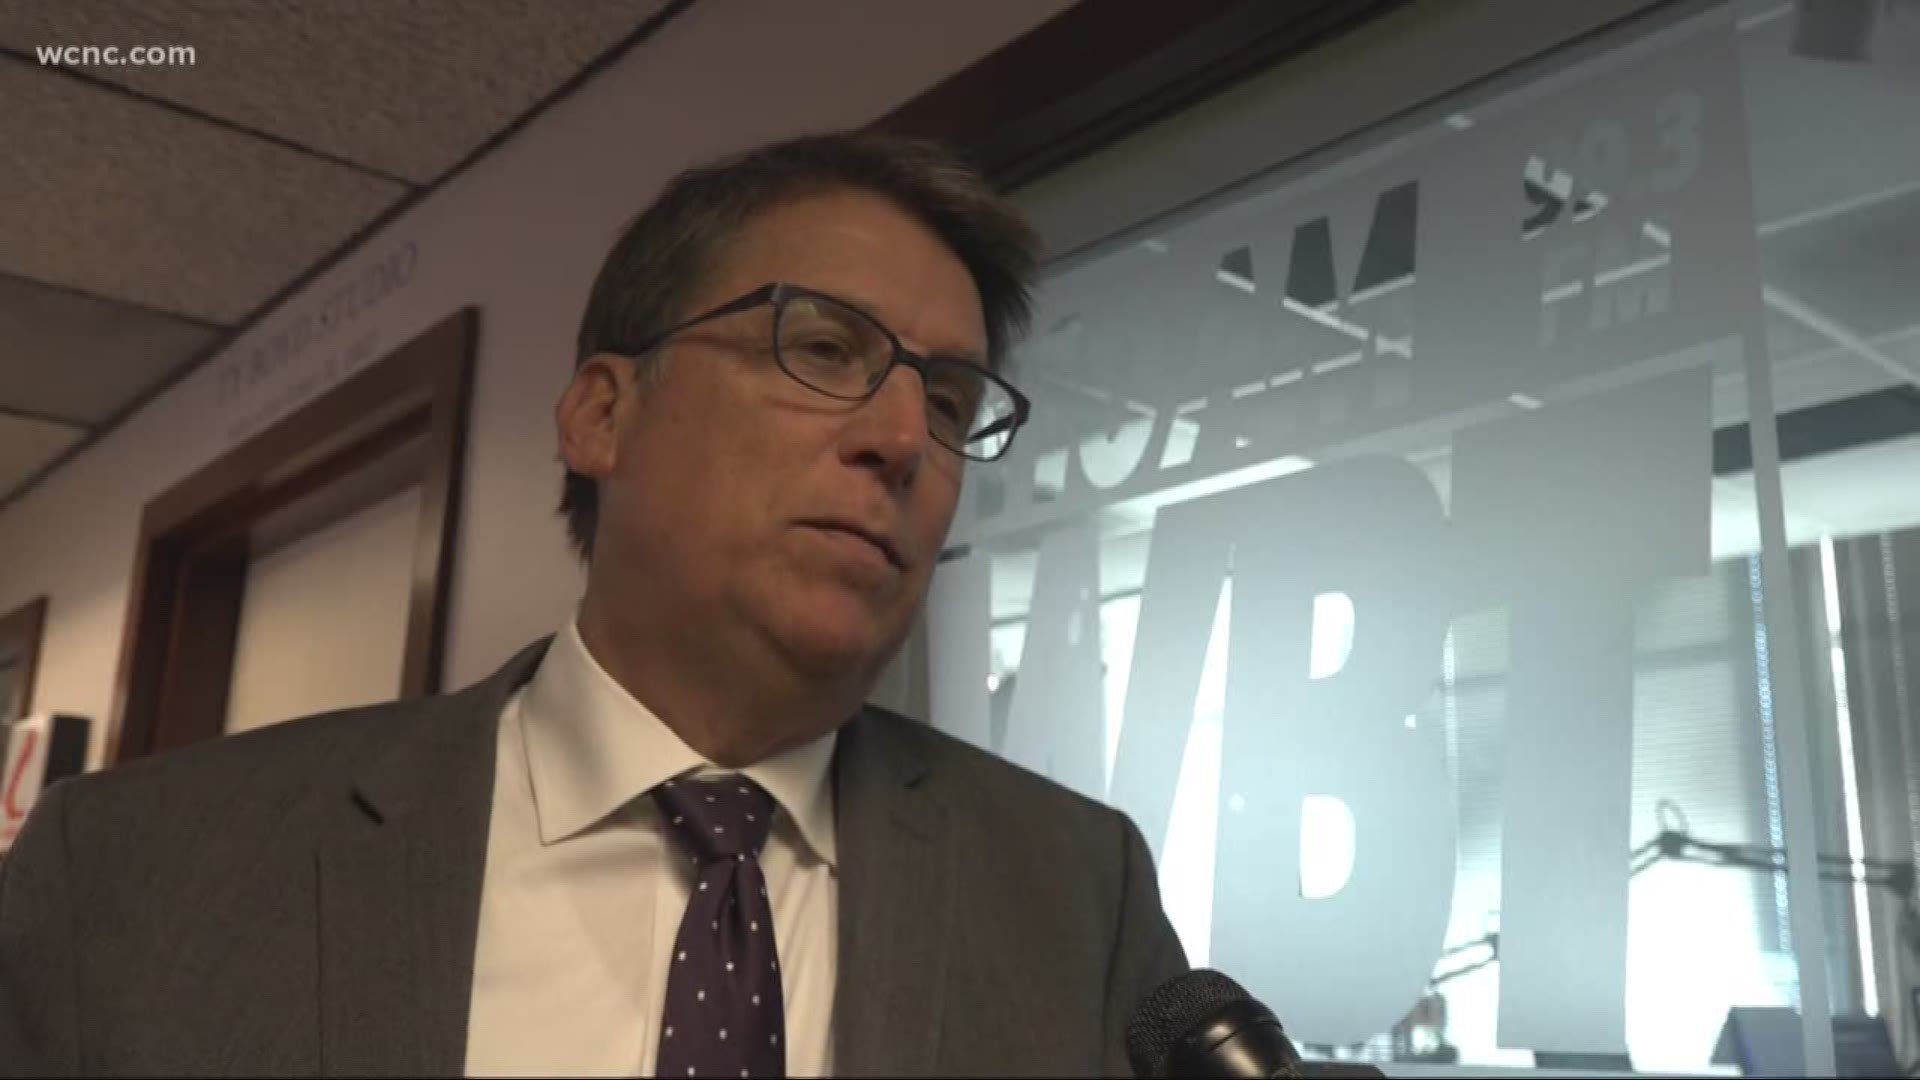 The former governor announced on his radio show that he would not run in the newly open District 9 seat in Congress. McCrory says he's got his eyes on the 2020 governors race or a U.S. Senate seat in 2022.